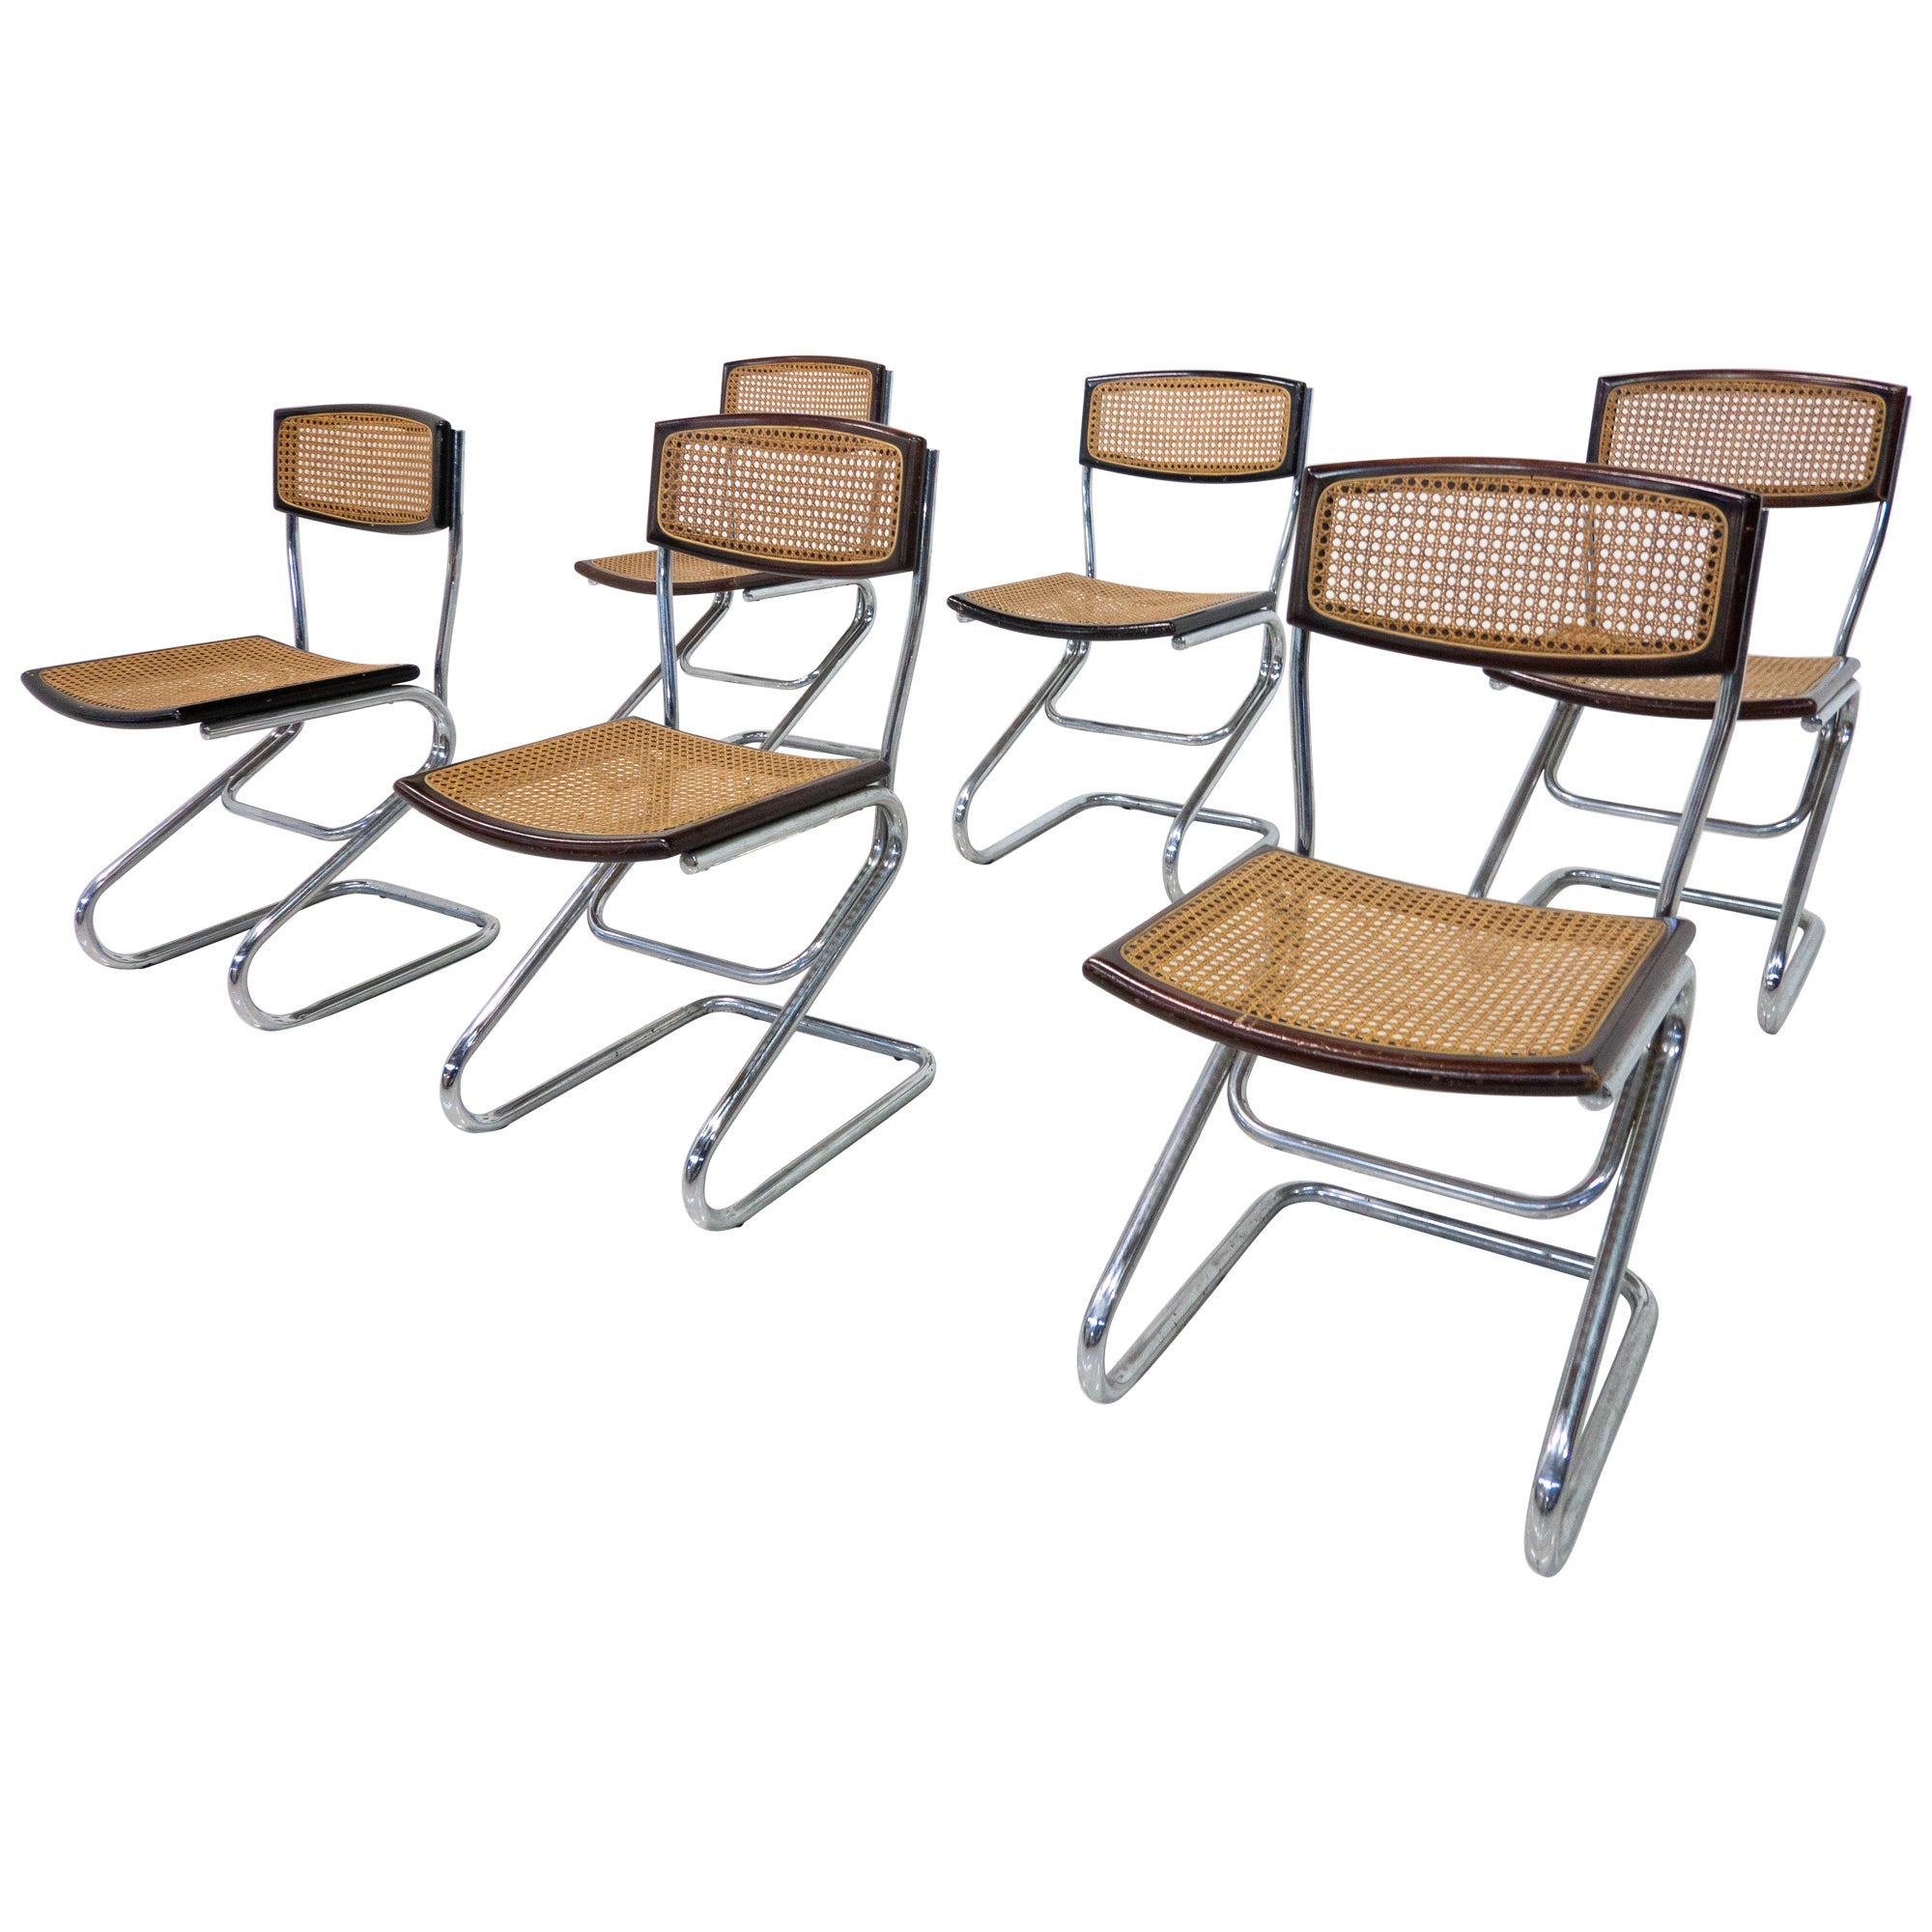 Mid-Century Modern Set of 6 Italian Cane Chairs, 1960s For Sale